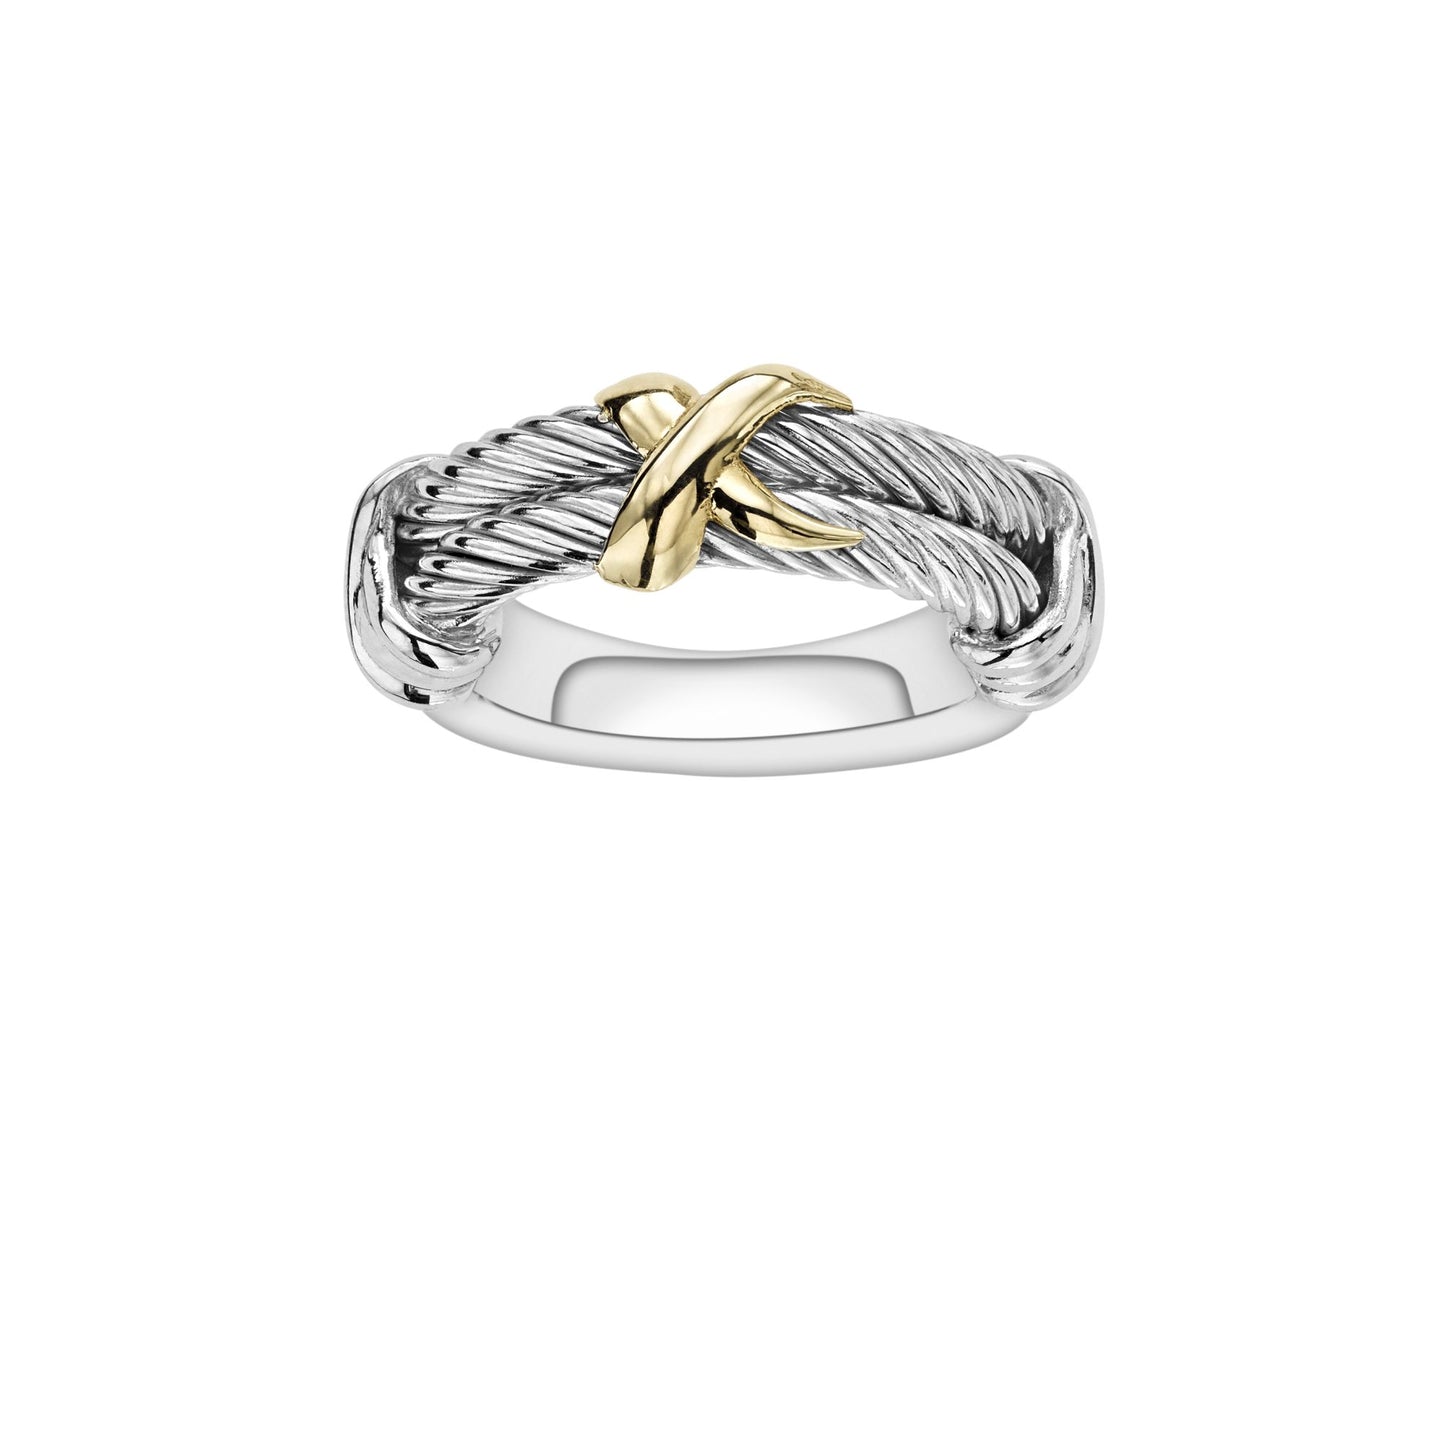 Silver & 18K Italian Cable Ring